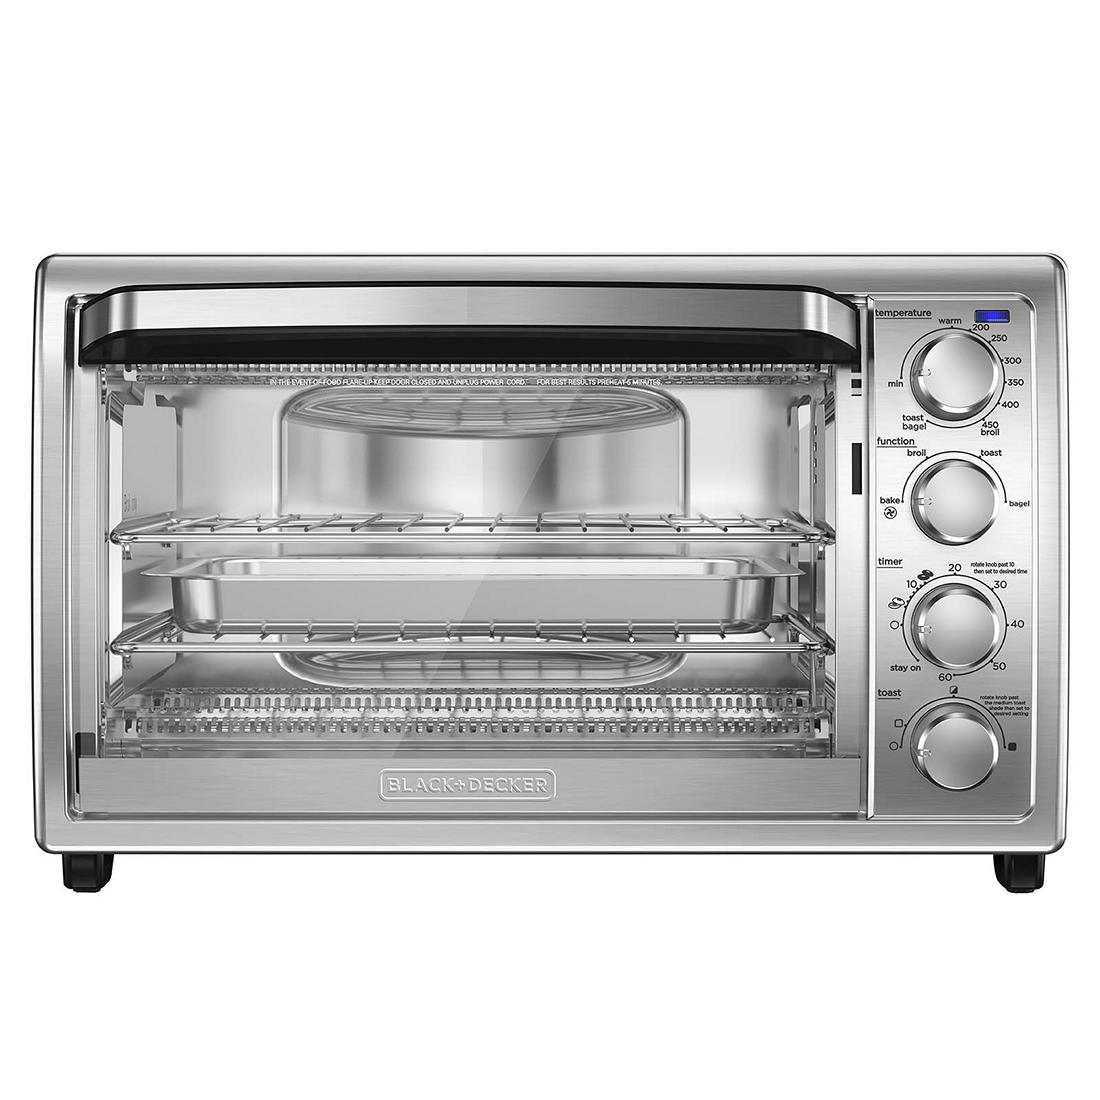 How to Choose the Best Convection Toaster Oven?